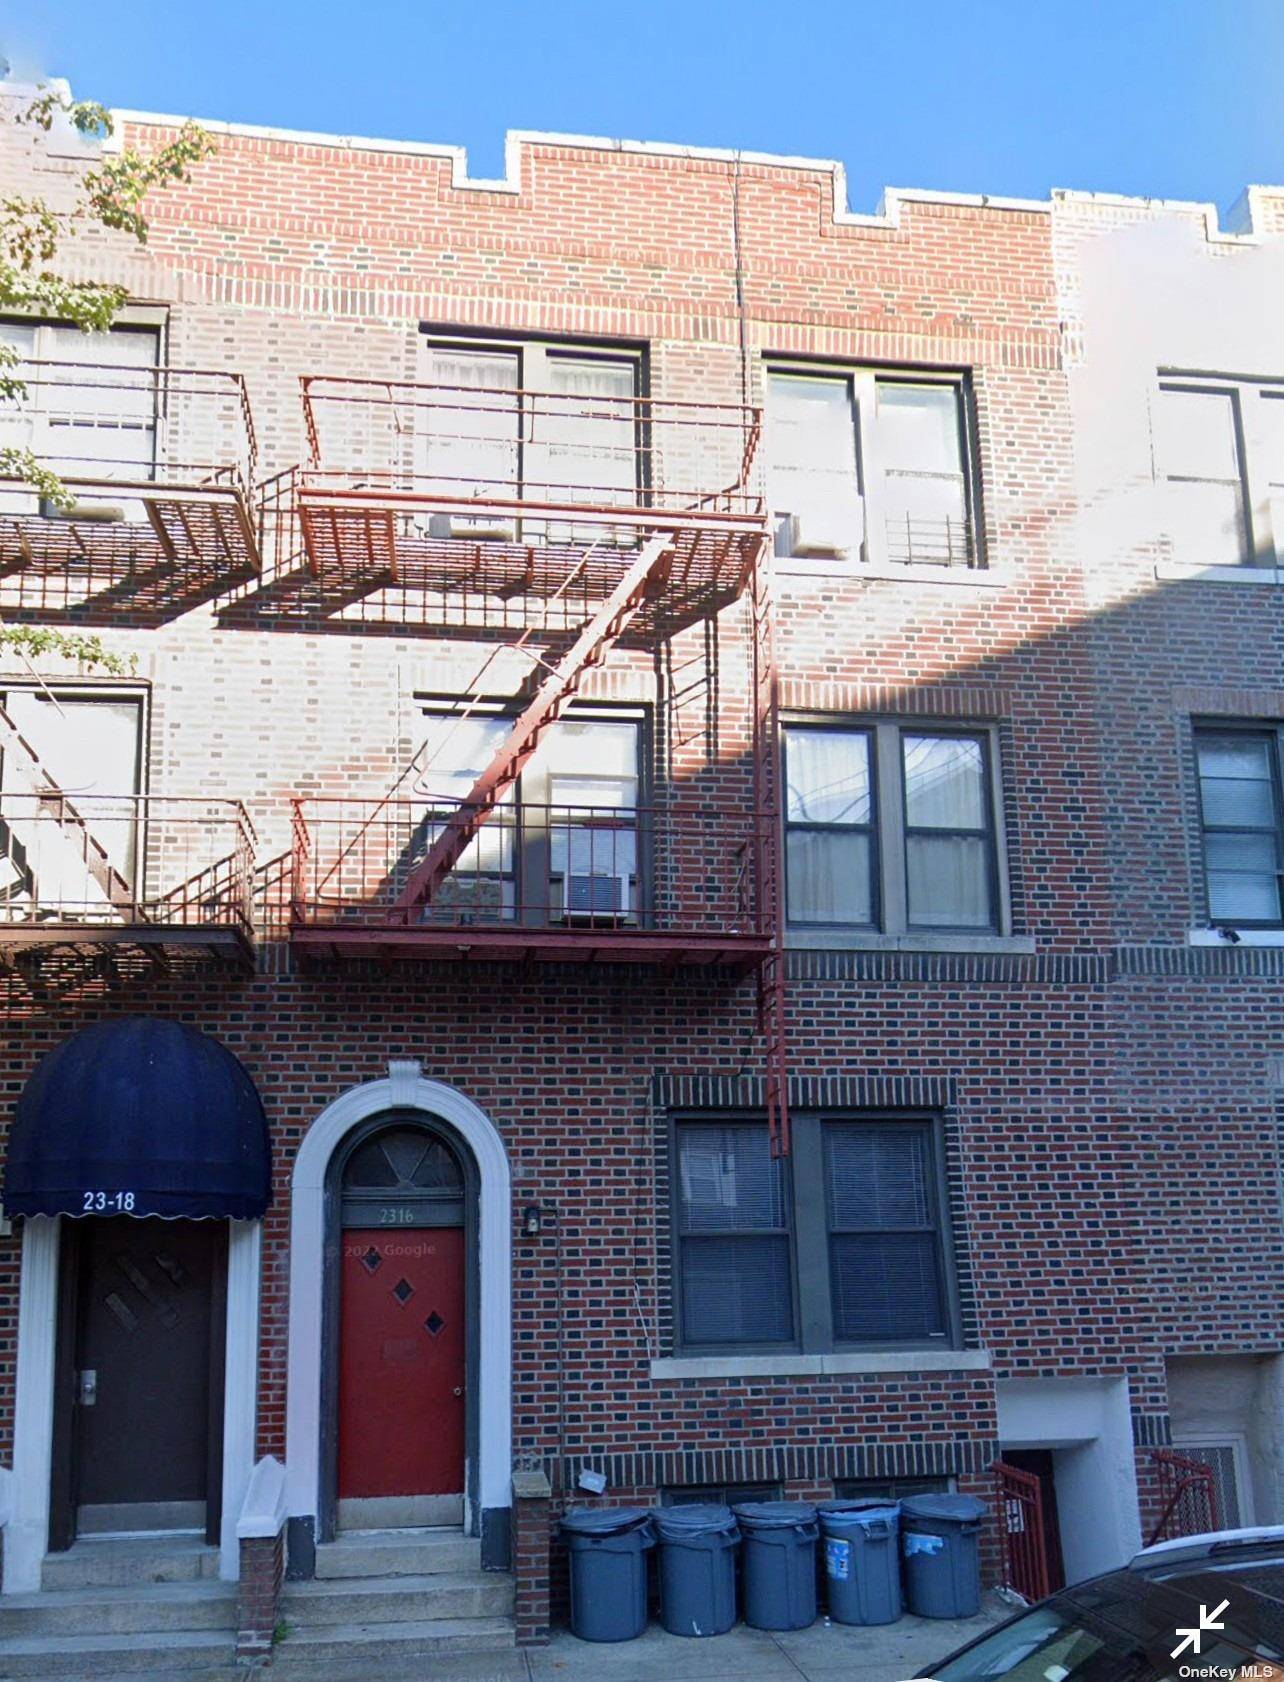 Astoria prime location 3 story brick building with six apartments.